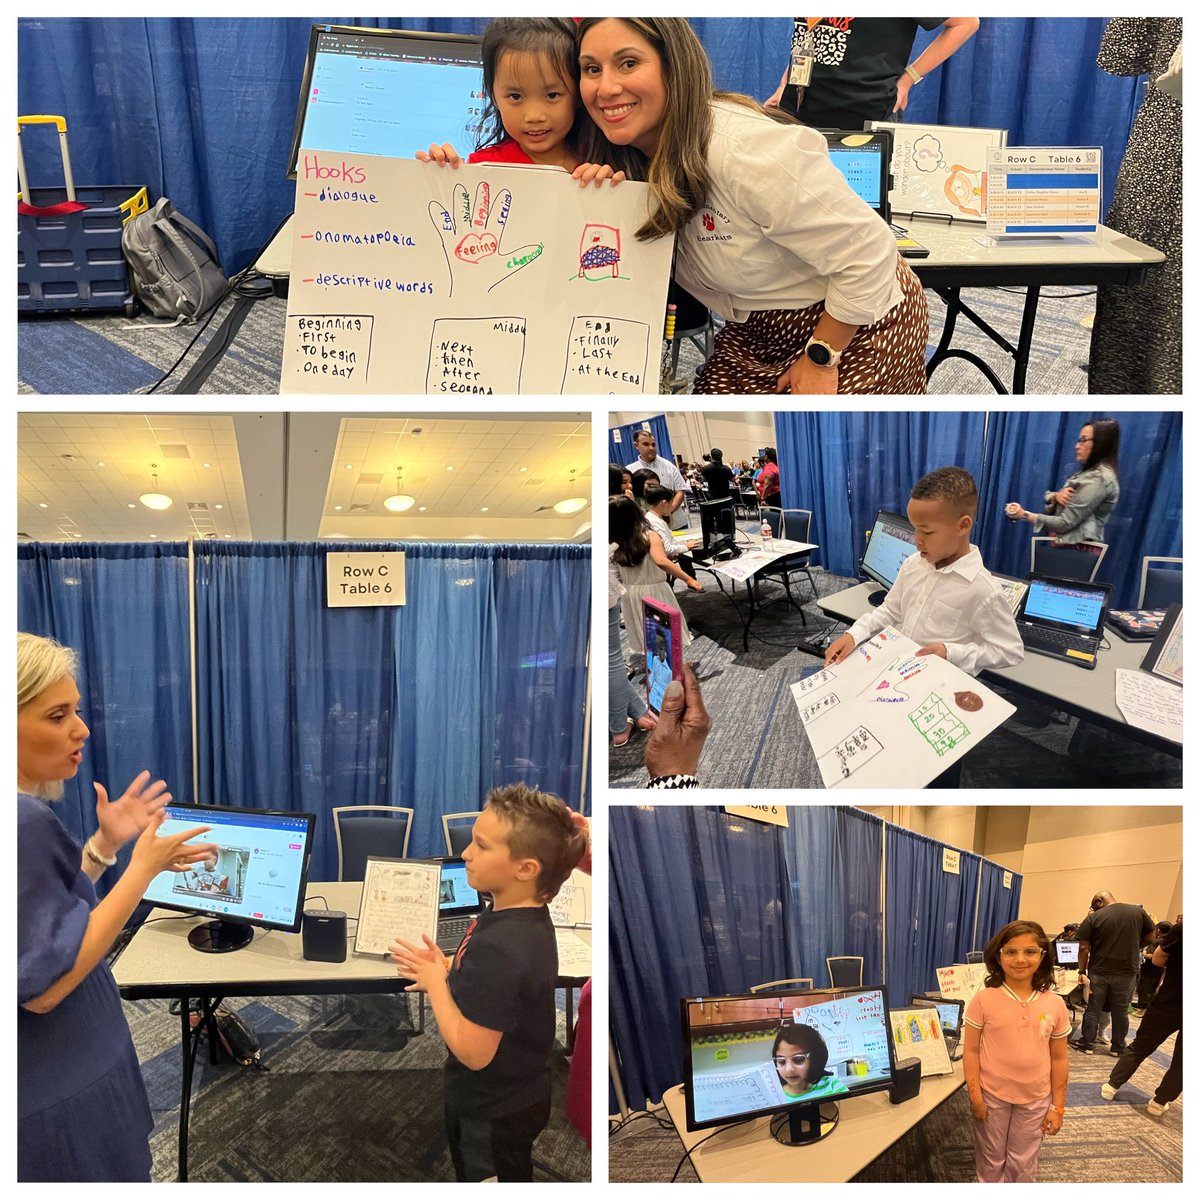 The EdTech Expo at the Berry Center was such fun! Our Bearkat firsties did an amazing job! We are so unbelievably proud of them. @BlackBearkats @FabGarcia24 @CyFairEdTech